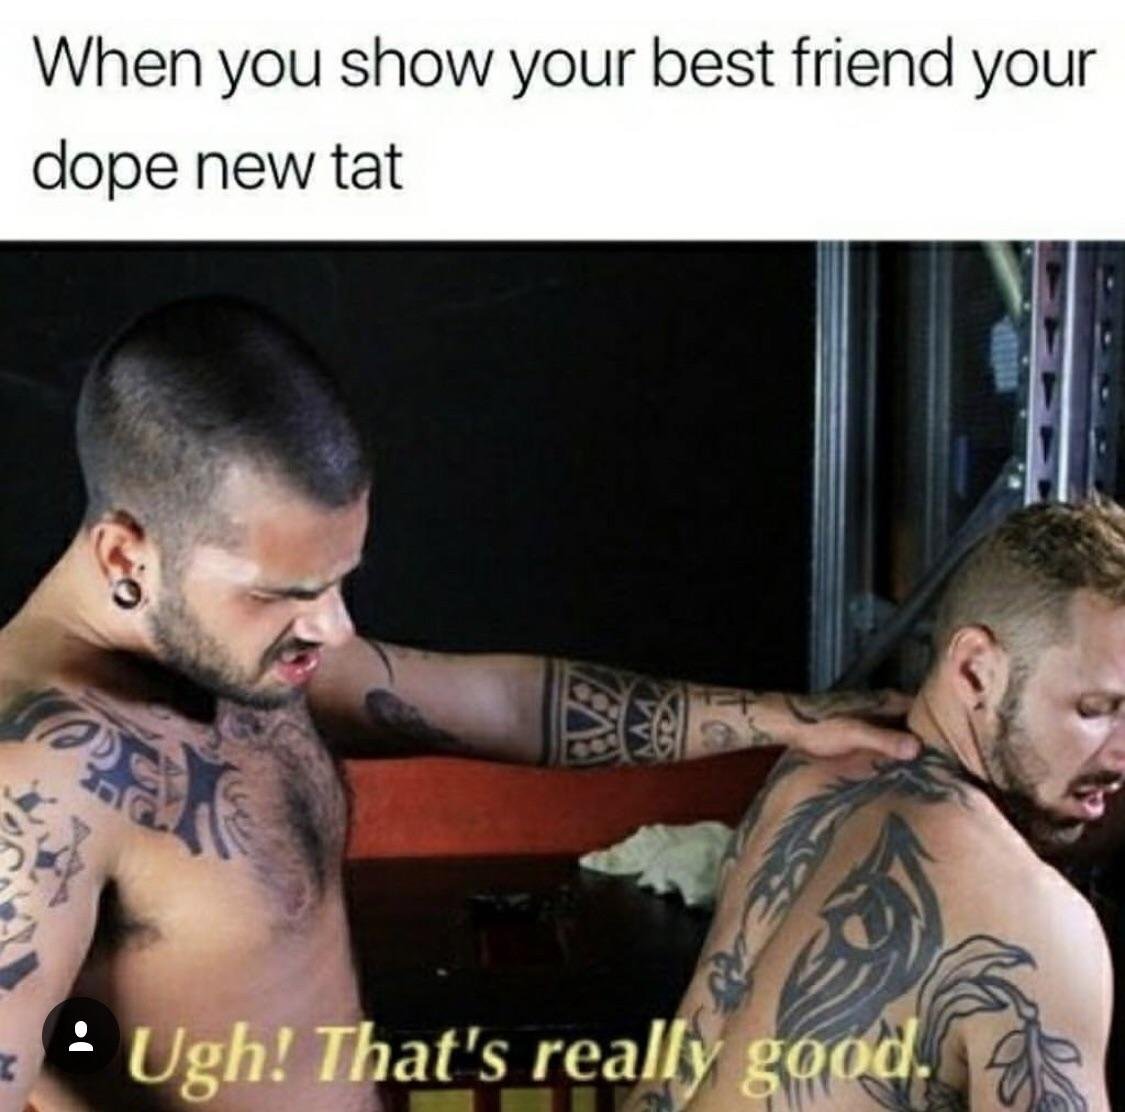 I’ll need someone to check out my tattoos 